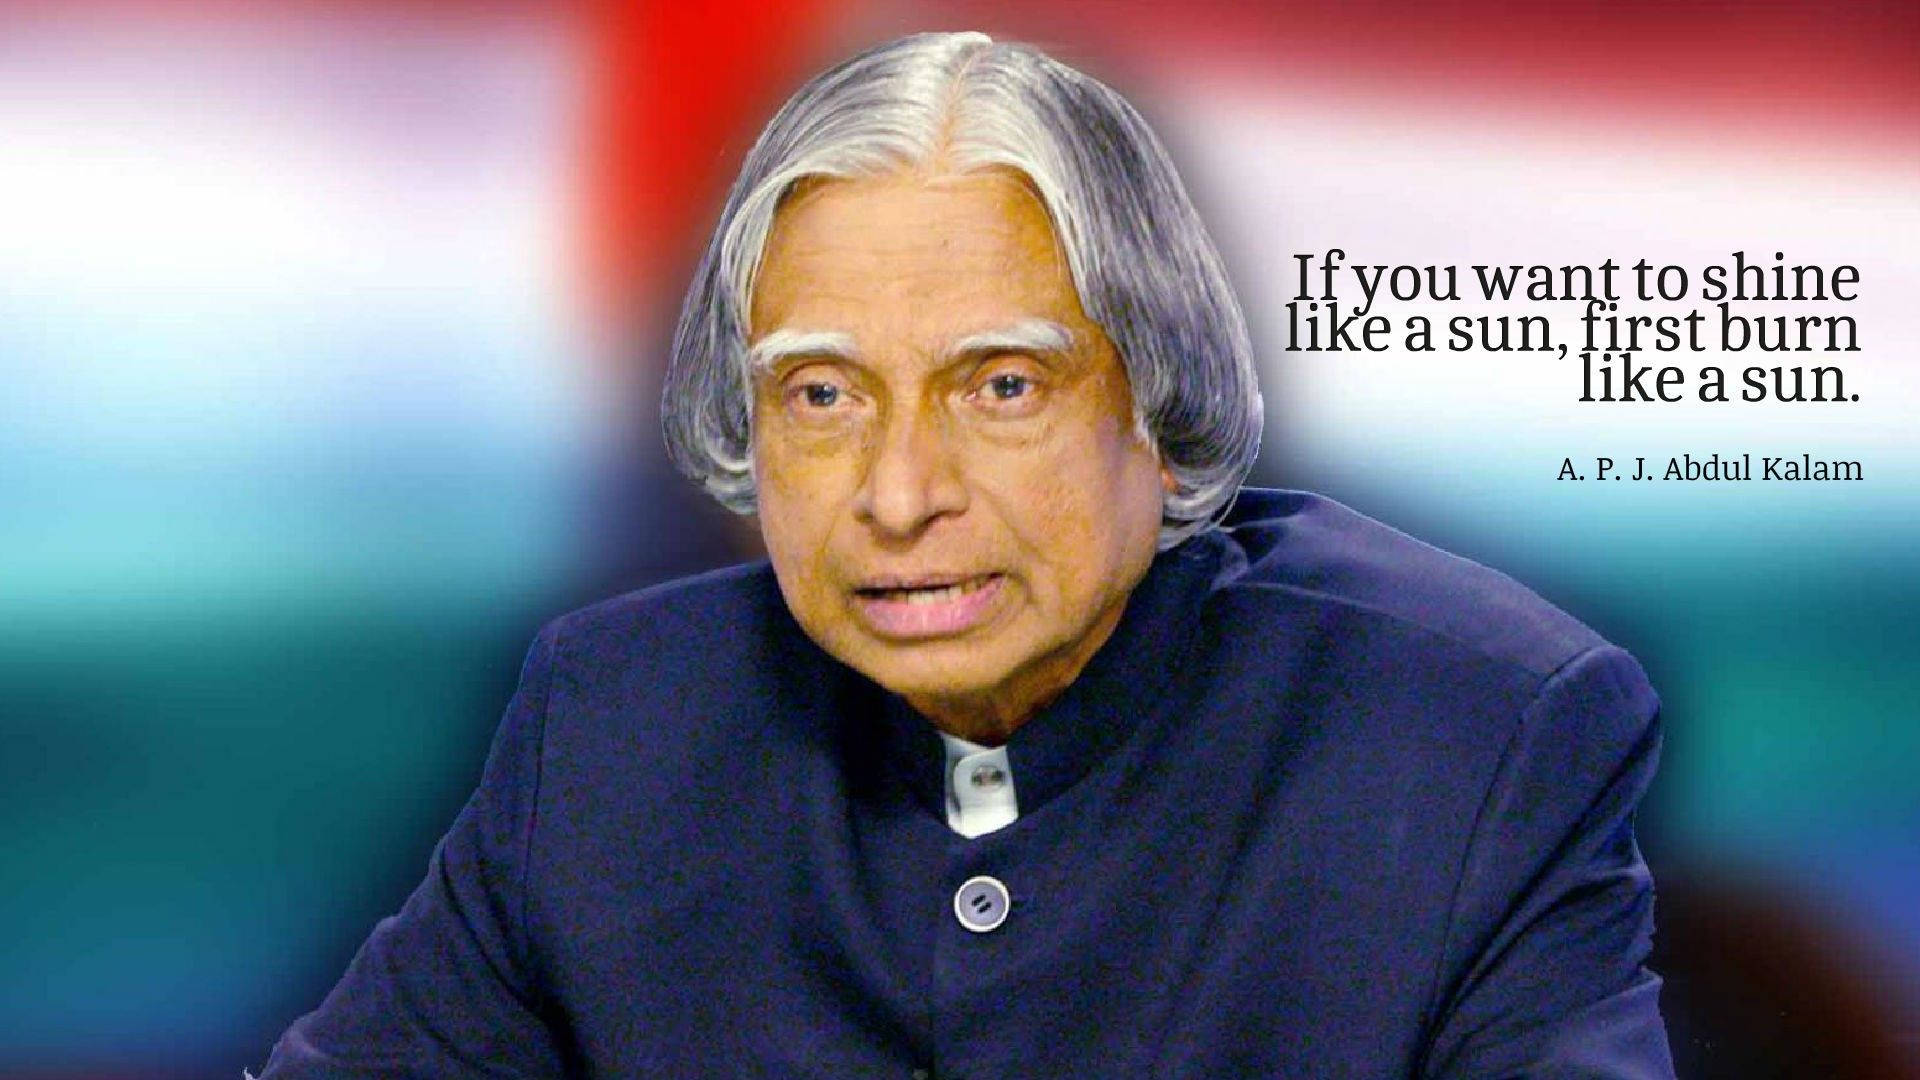 Abdul Kalam Hd Like A Sun Quote Background